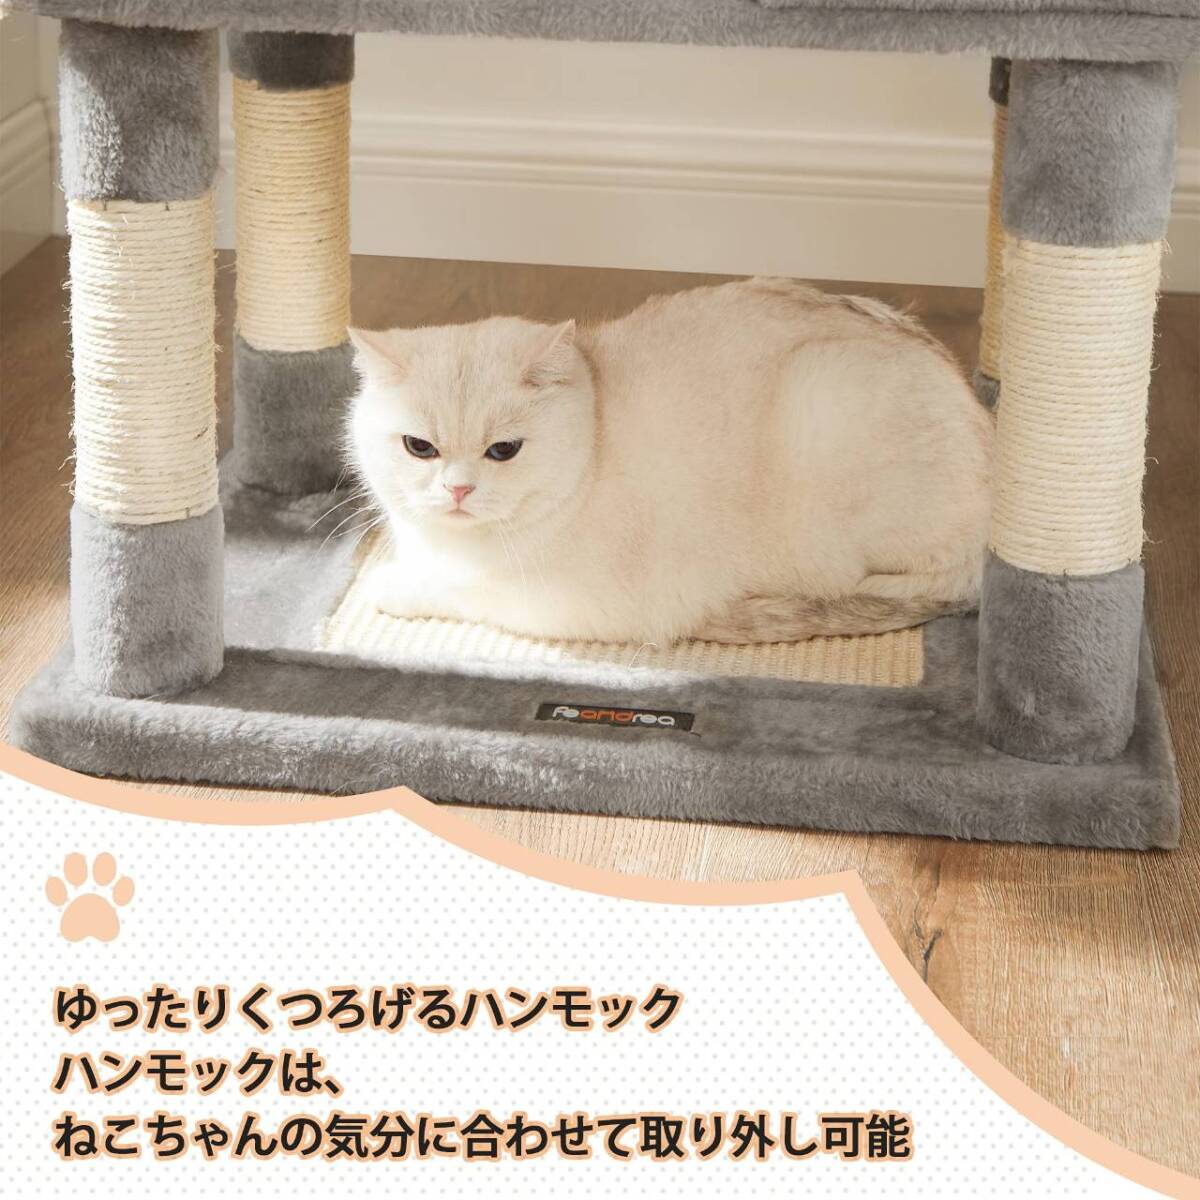  large cat .OK. for interior cat tower, hammock attaching 